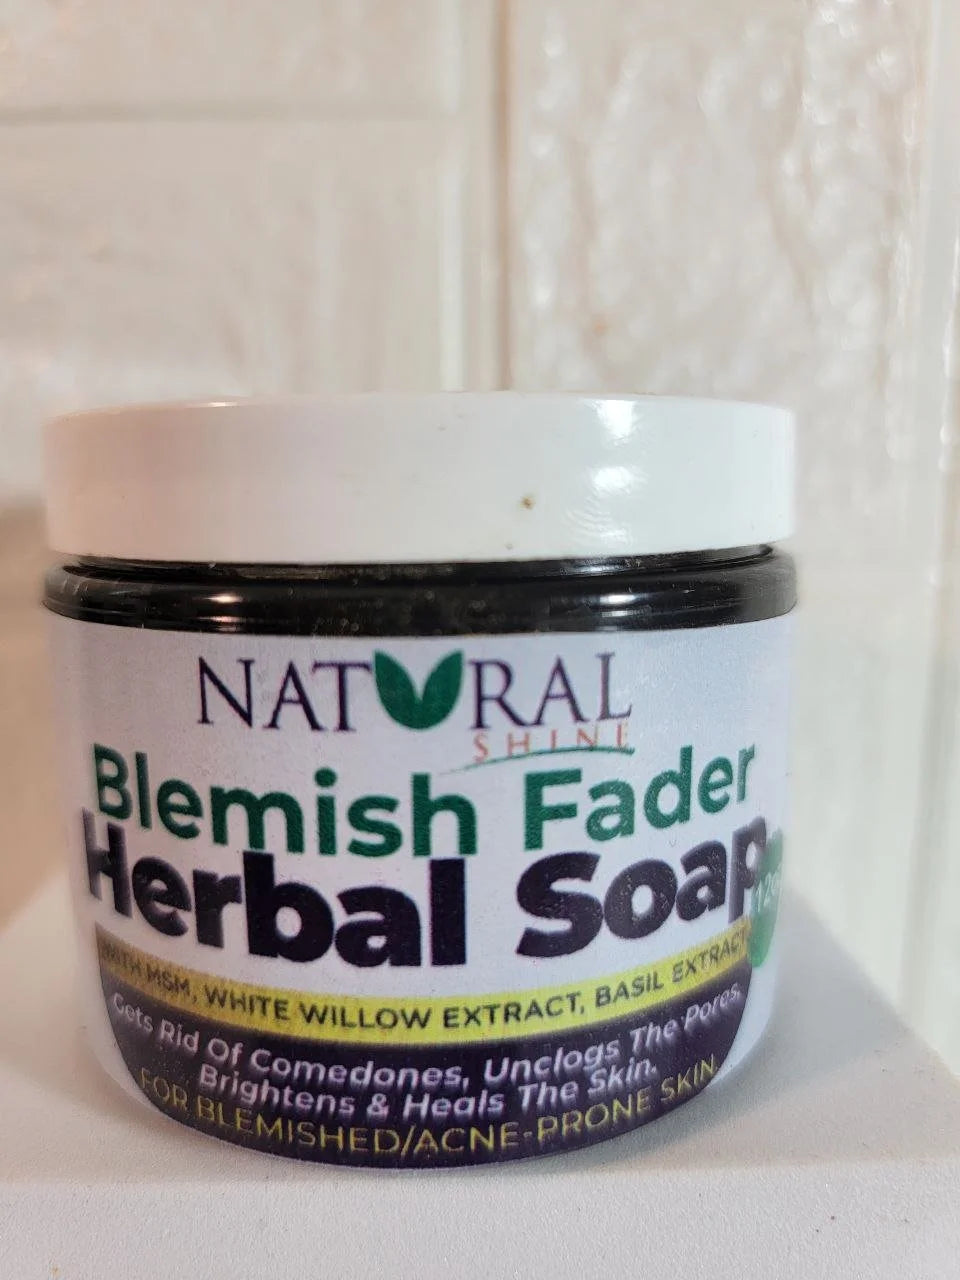 Blemish Fader Herbal Soap with MSM, White Willow Extract, Basil extract